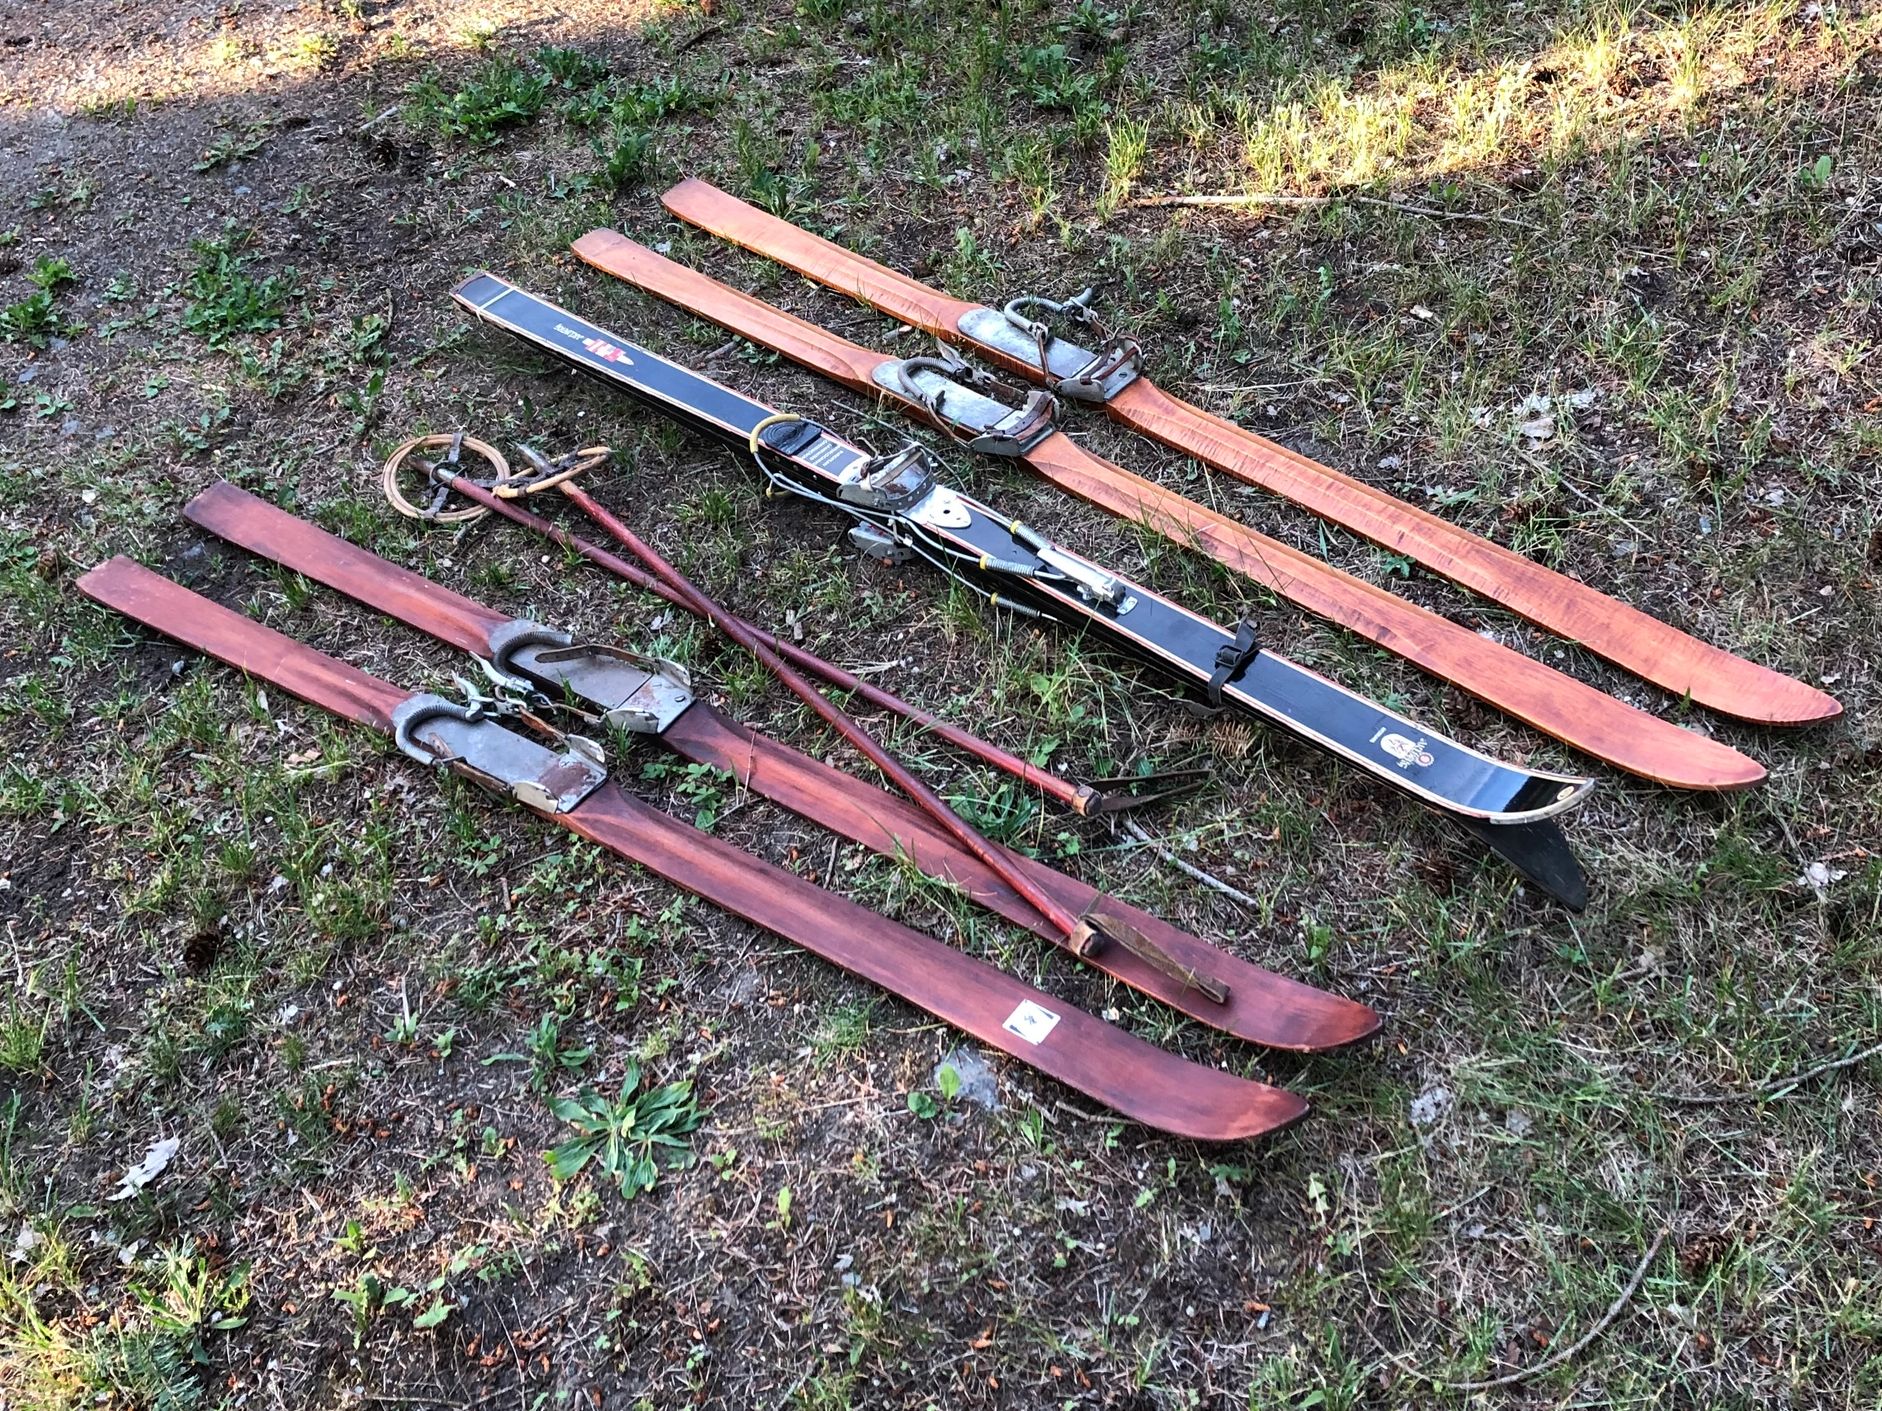 Rusticana Rentals - The Whiskey Jacks (antique downhill skis)